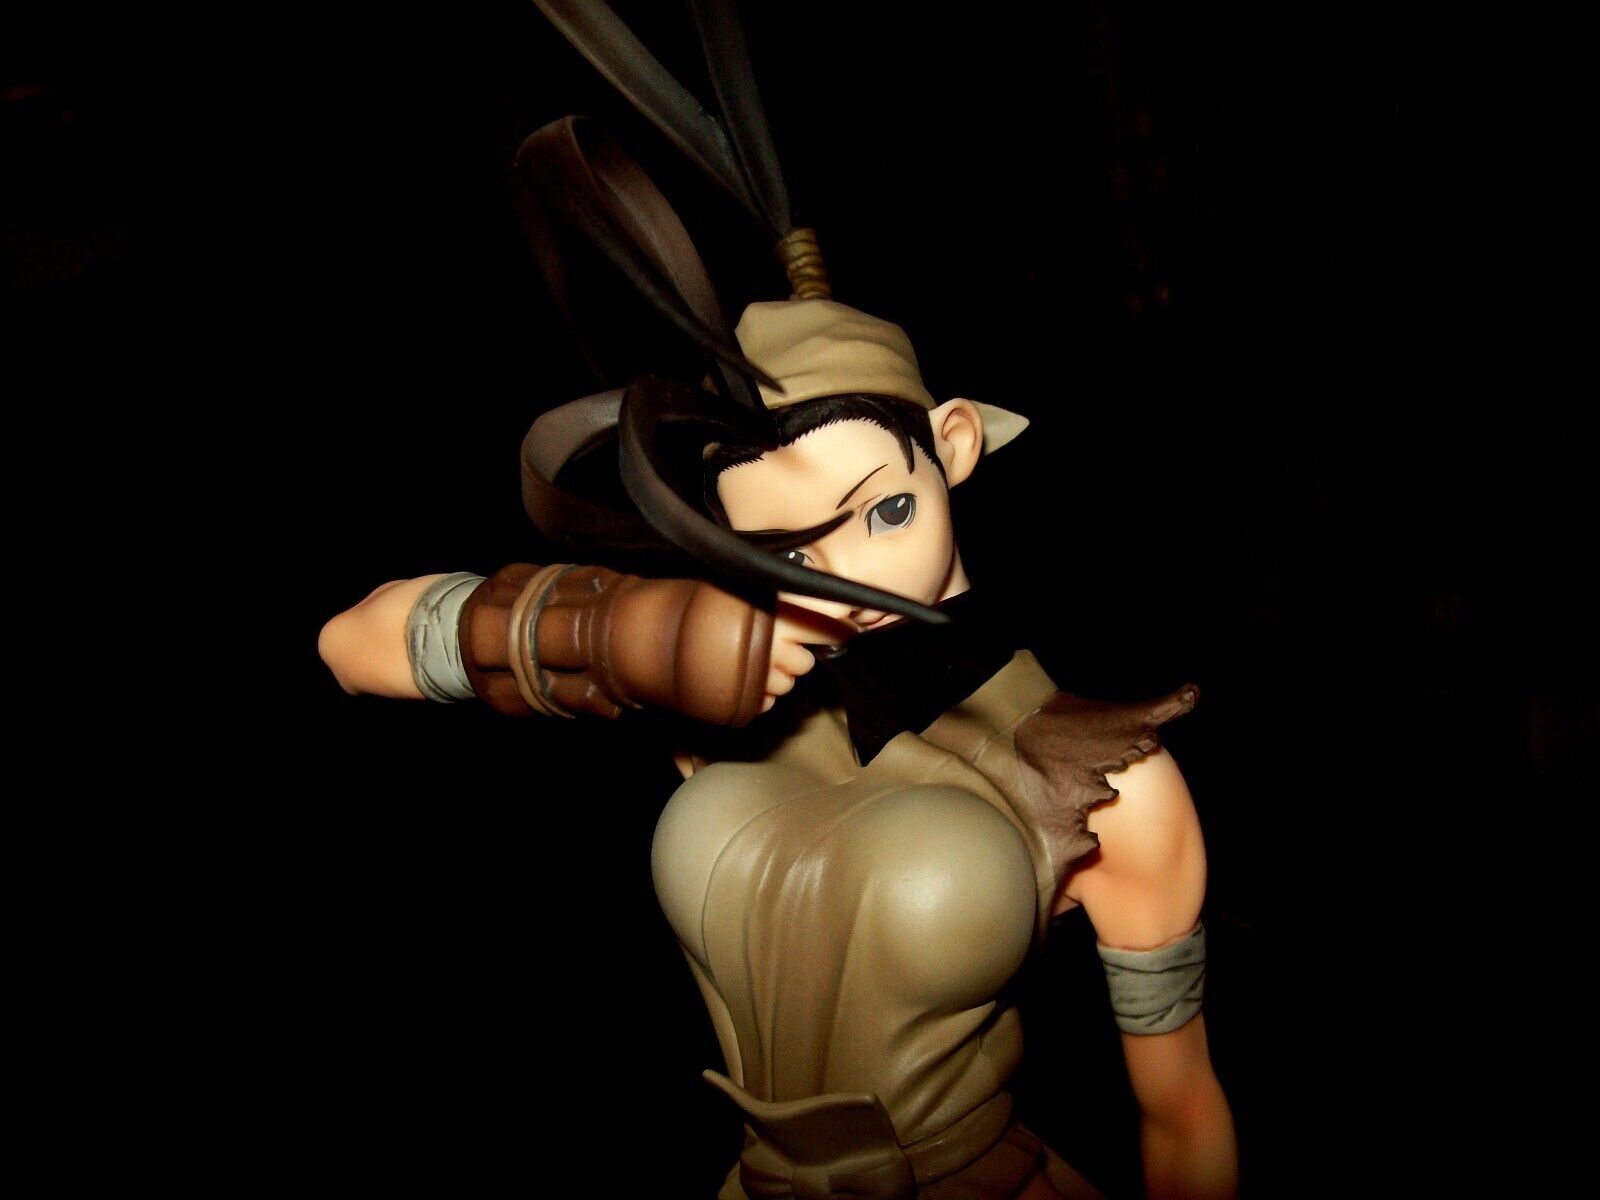 Street Fighter III - Ibuki - Excellent Model - 1/8 (MegaHouse)